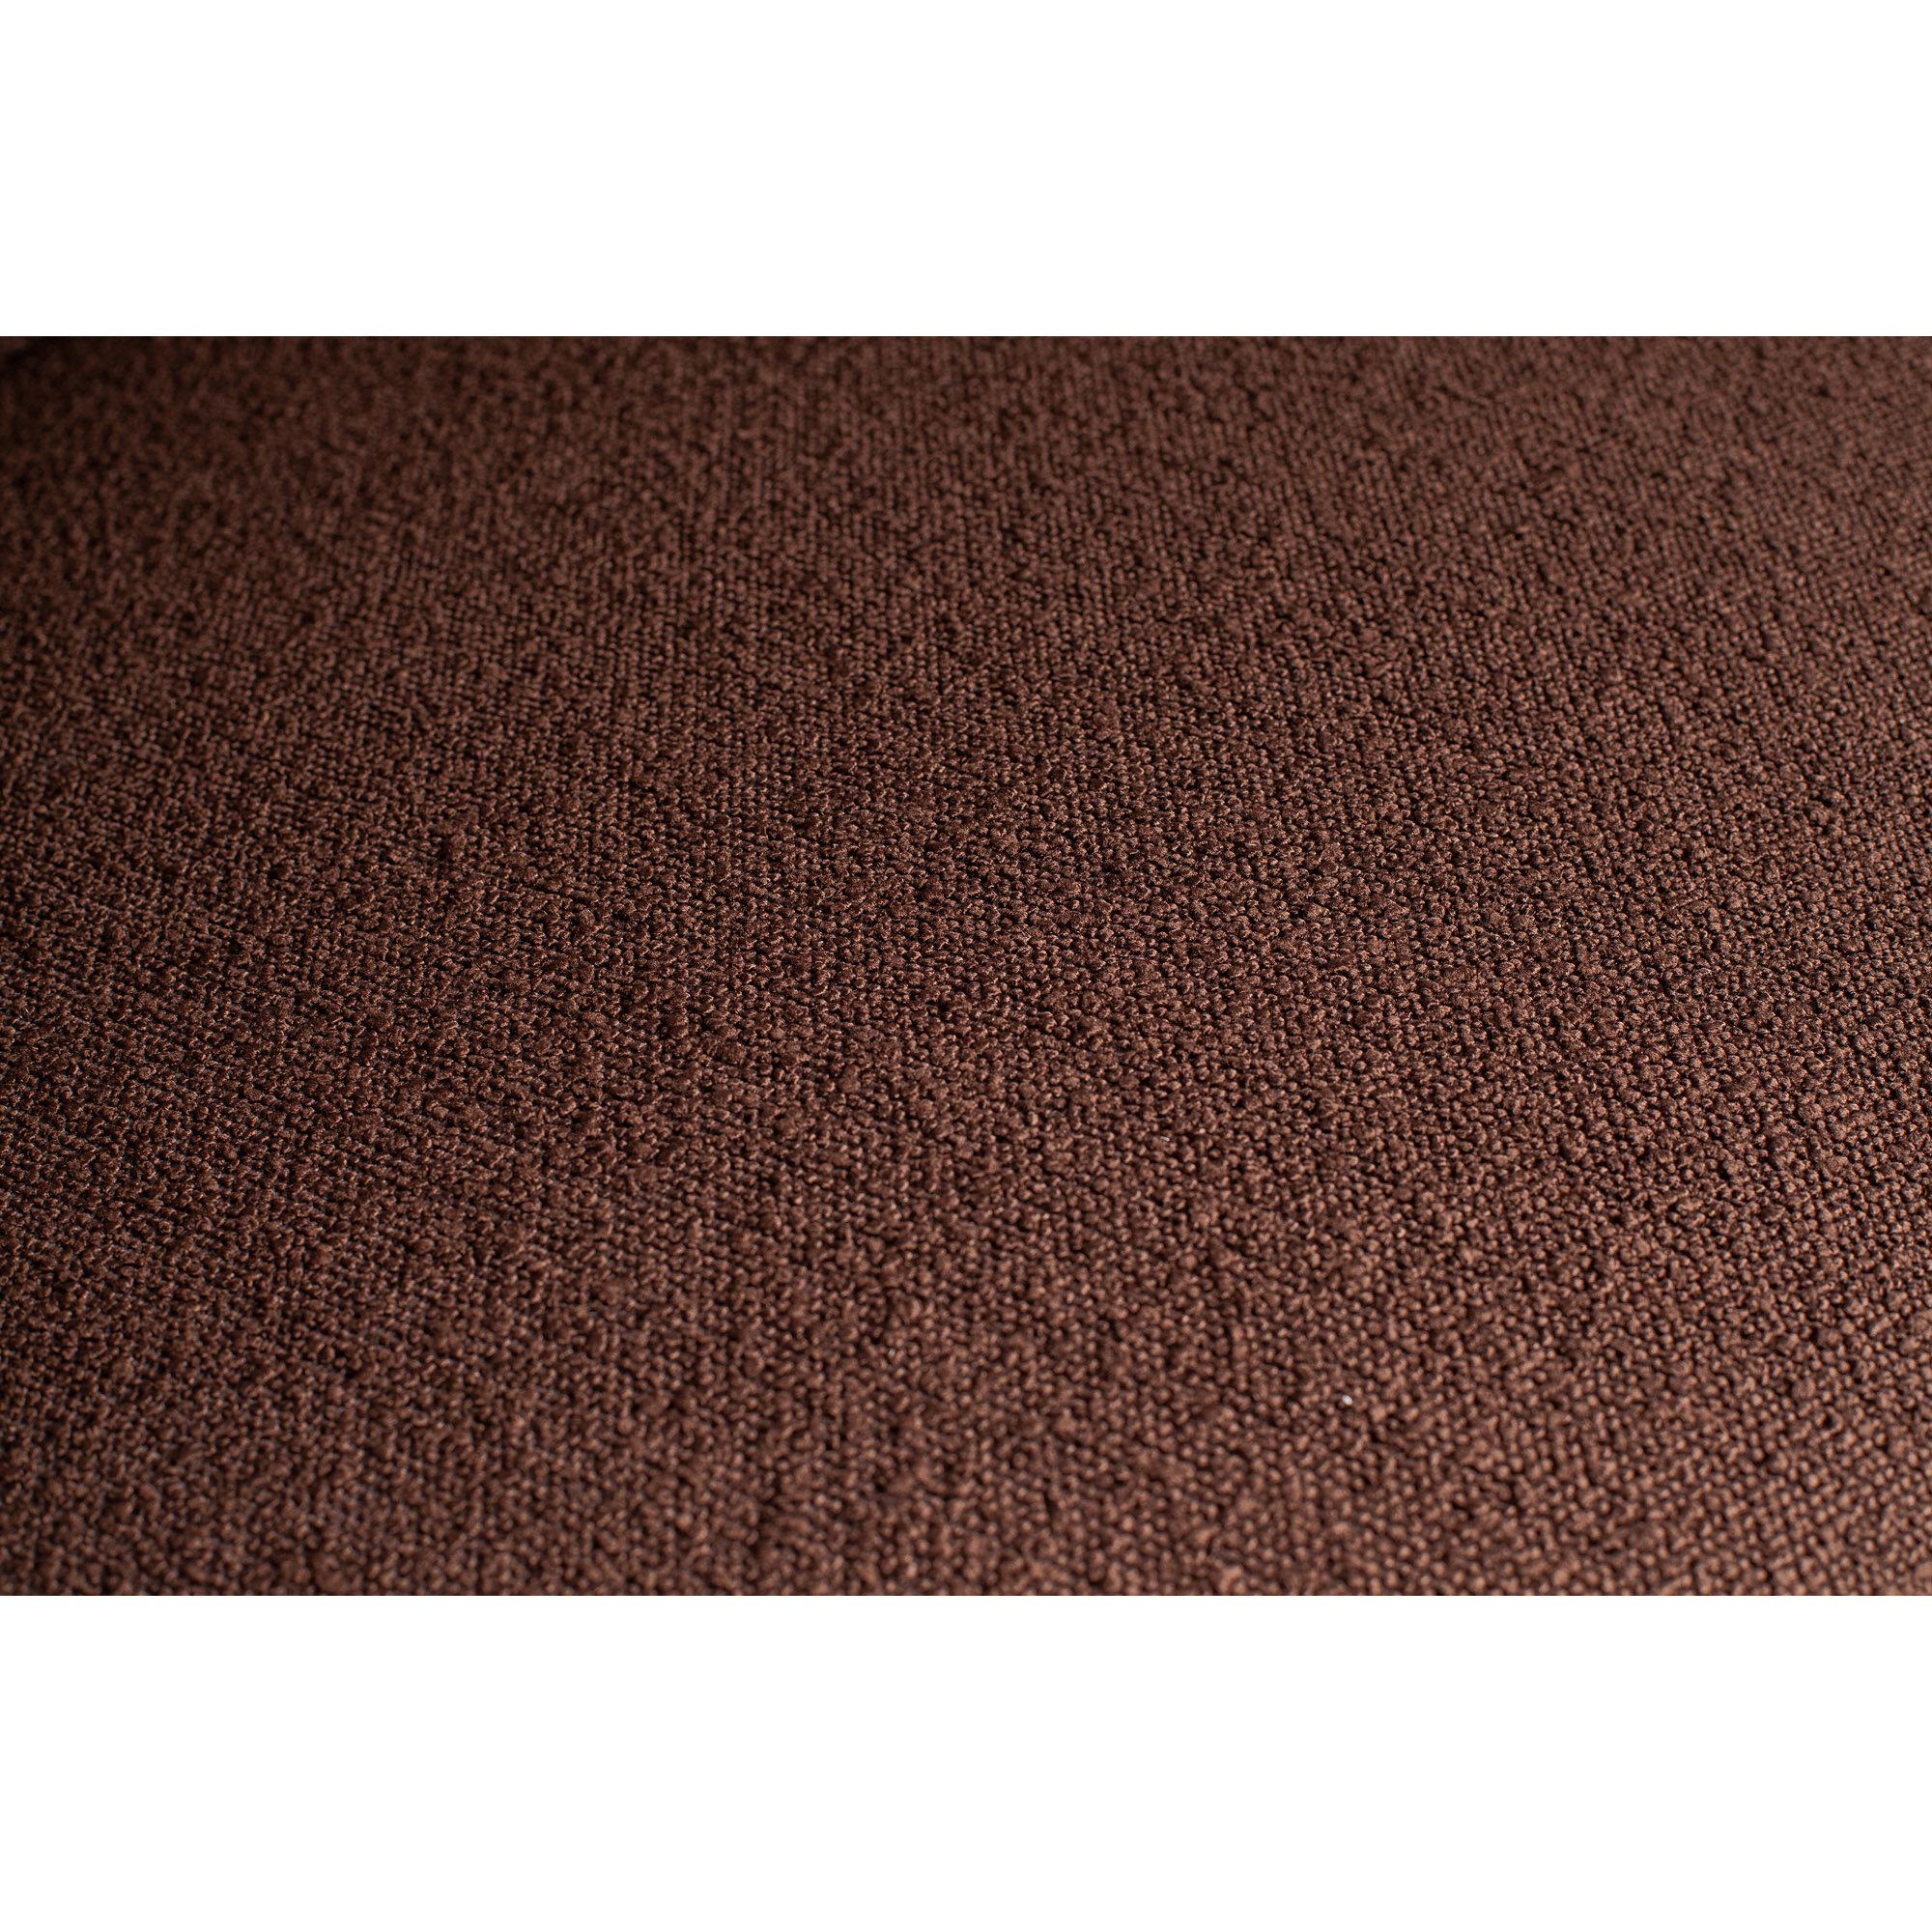  Statement Xl 4-pers Sofa 372 cm Boucle - Coffee fra BePureHome i Boucle (Varenr: 378656-K)